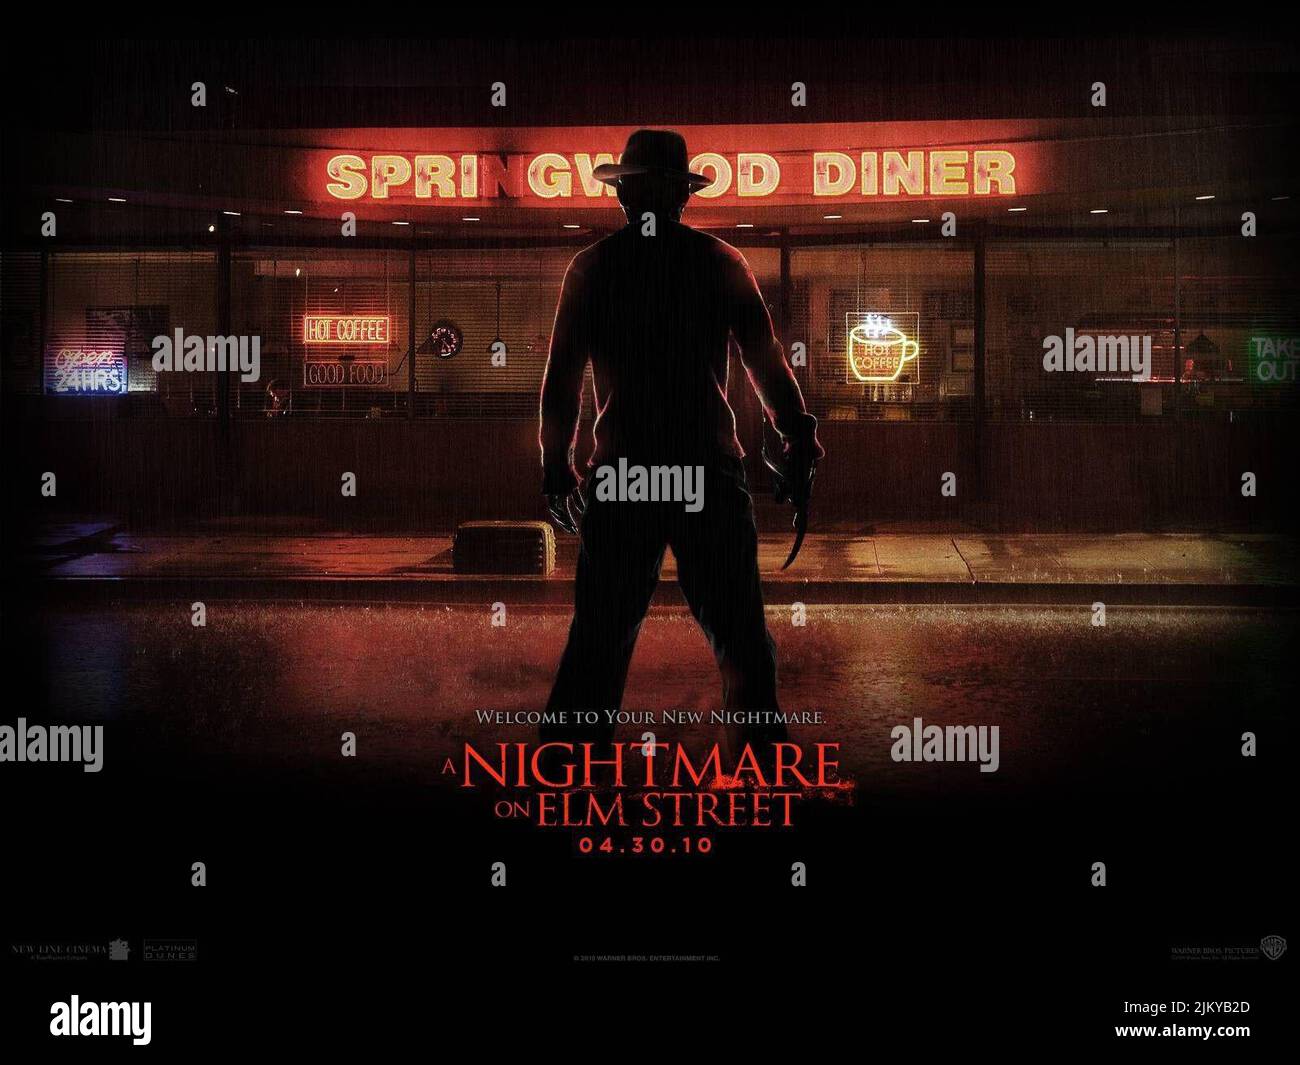 JACKIE EARLE HALEY POSTER, A NIGHTMARE ON ELM STREET, 2010 Stock Photo